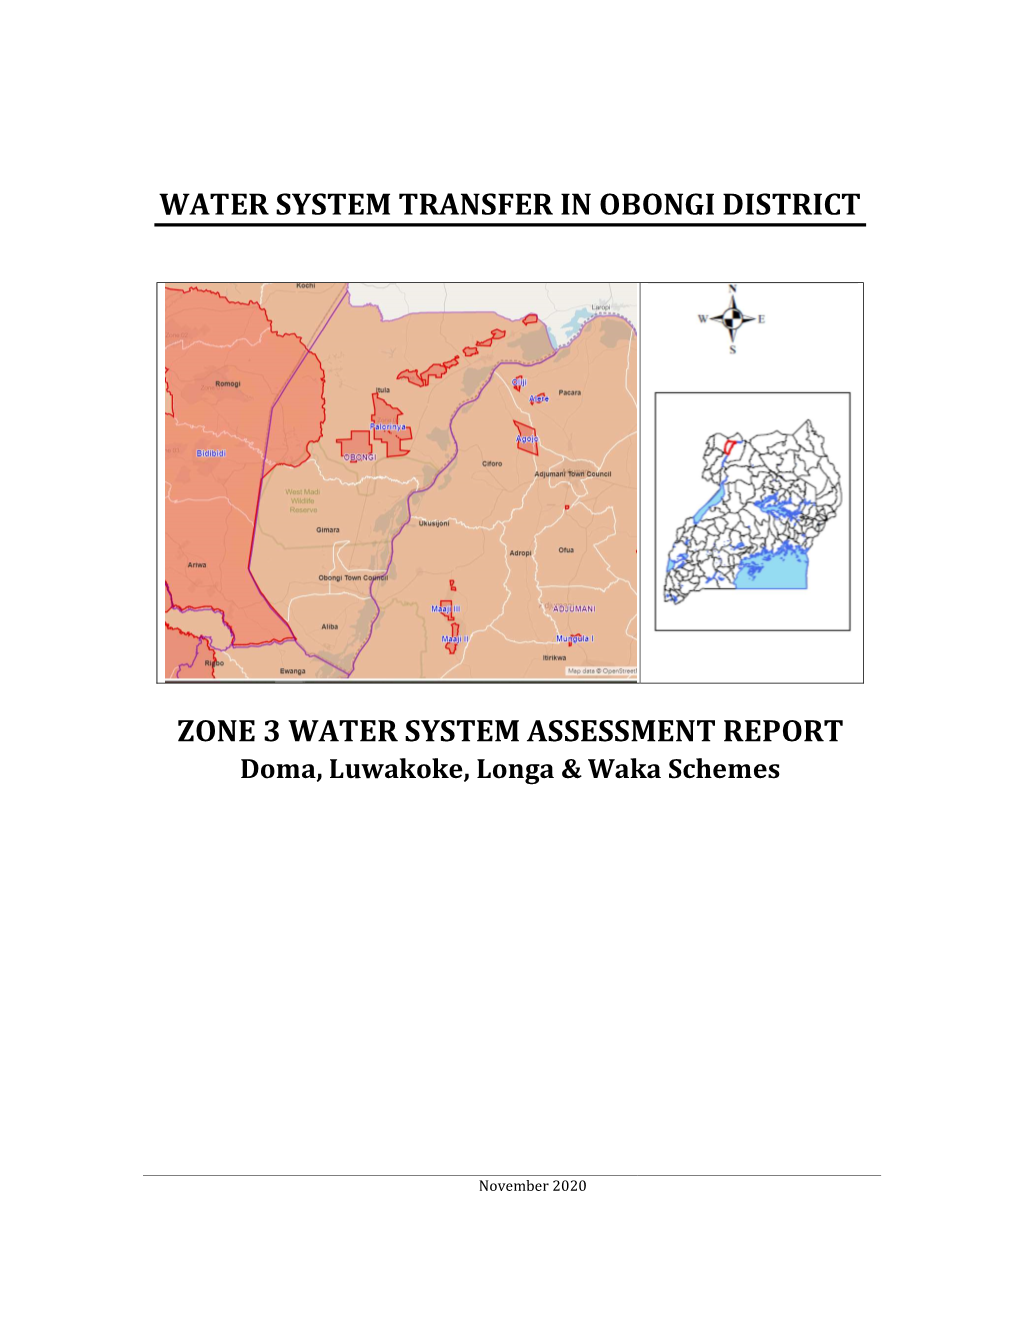 Water System Transfer in Obongi District Zone 3